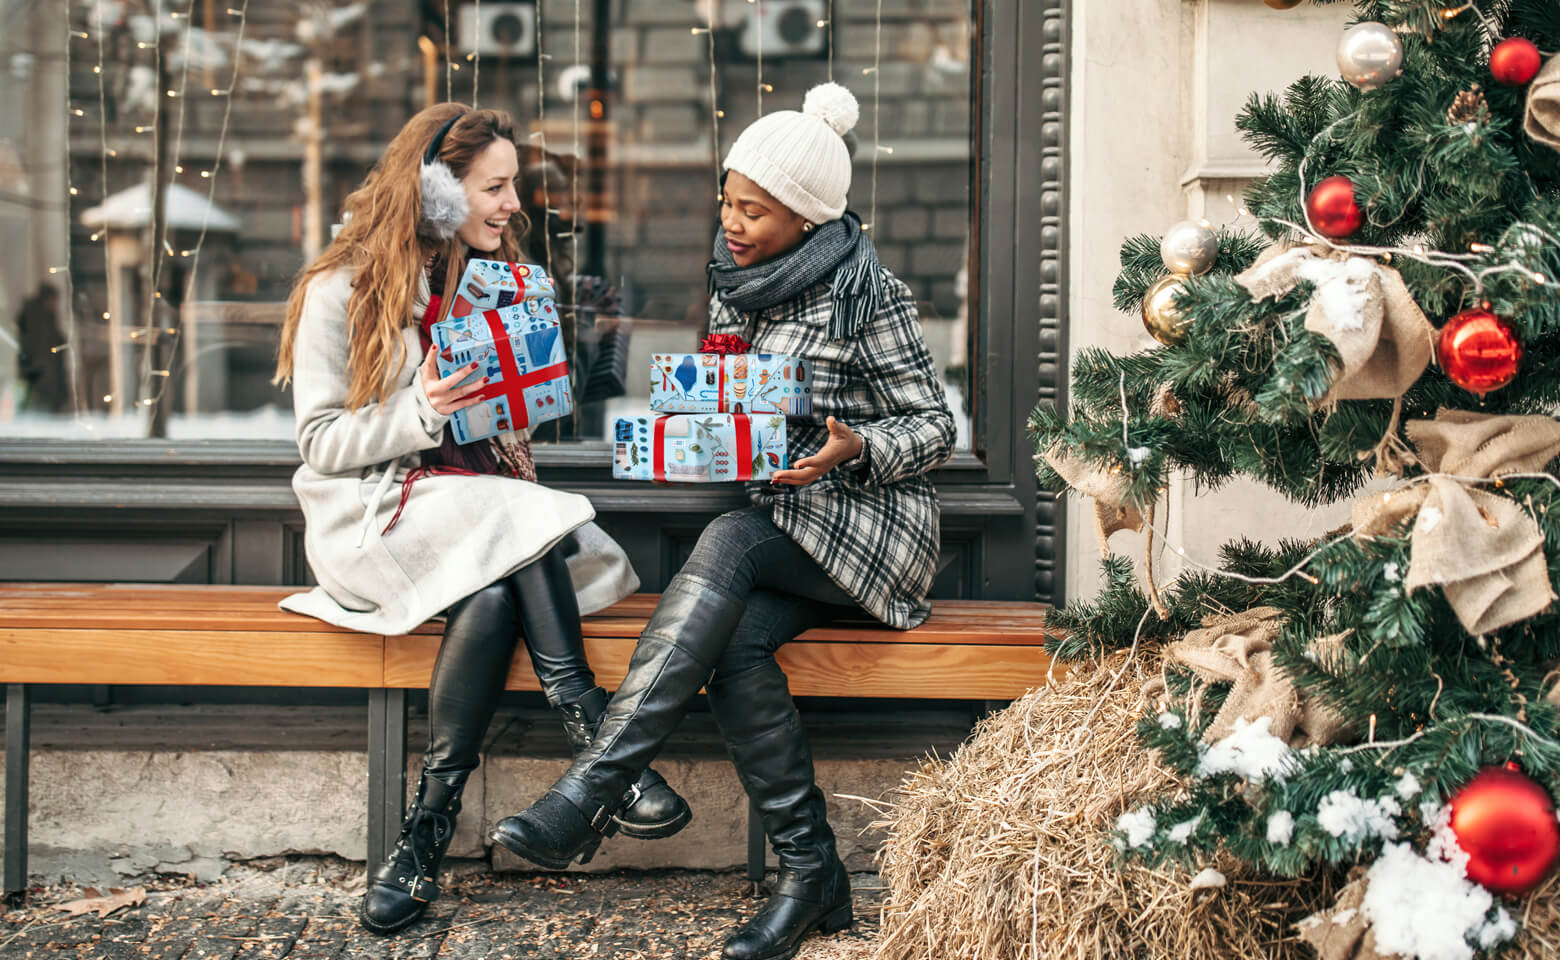 Two women exchange gifts in front of a store.